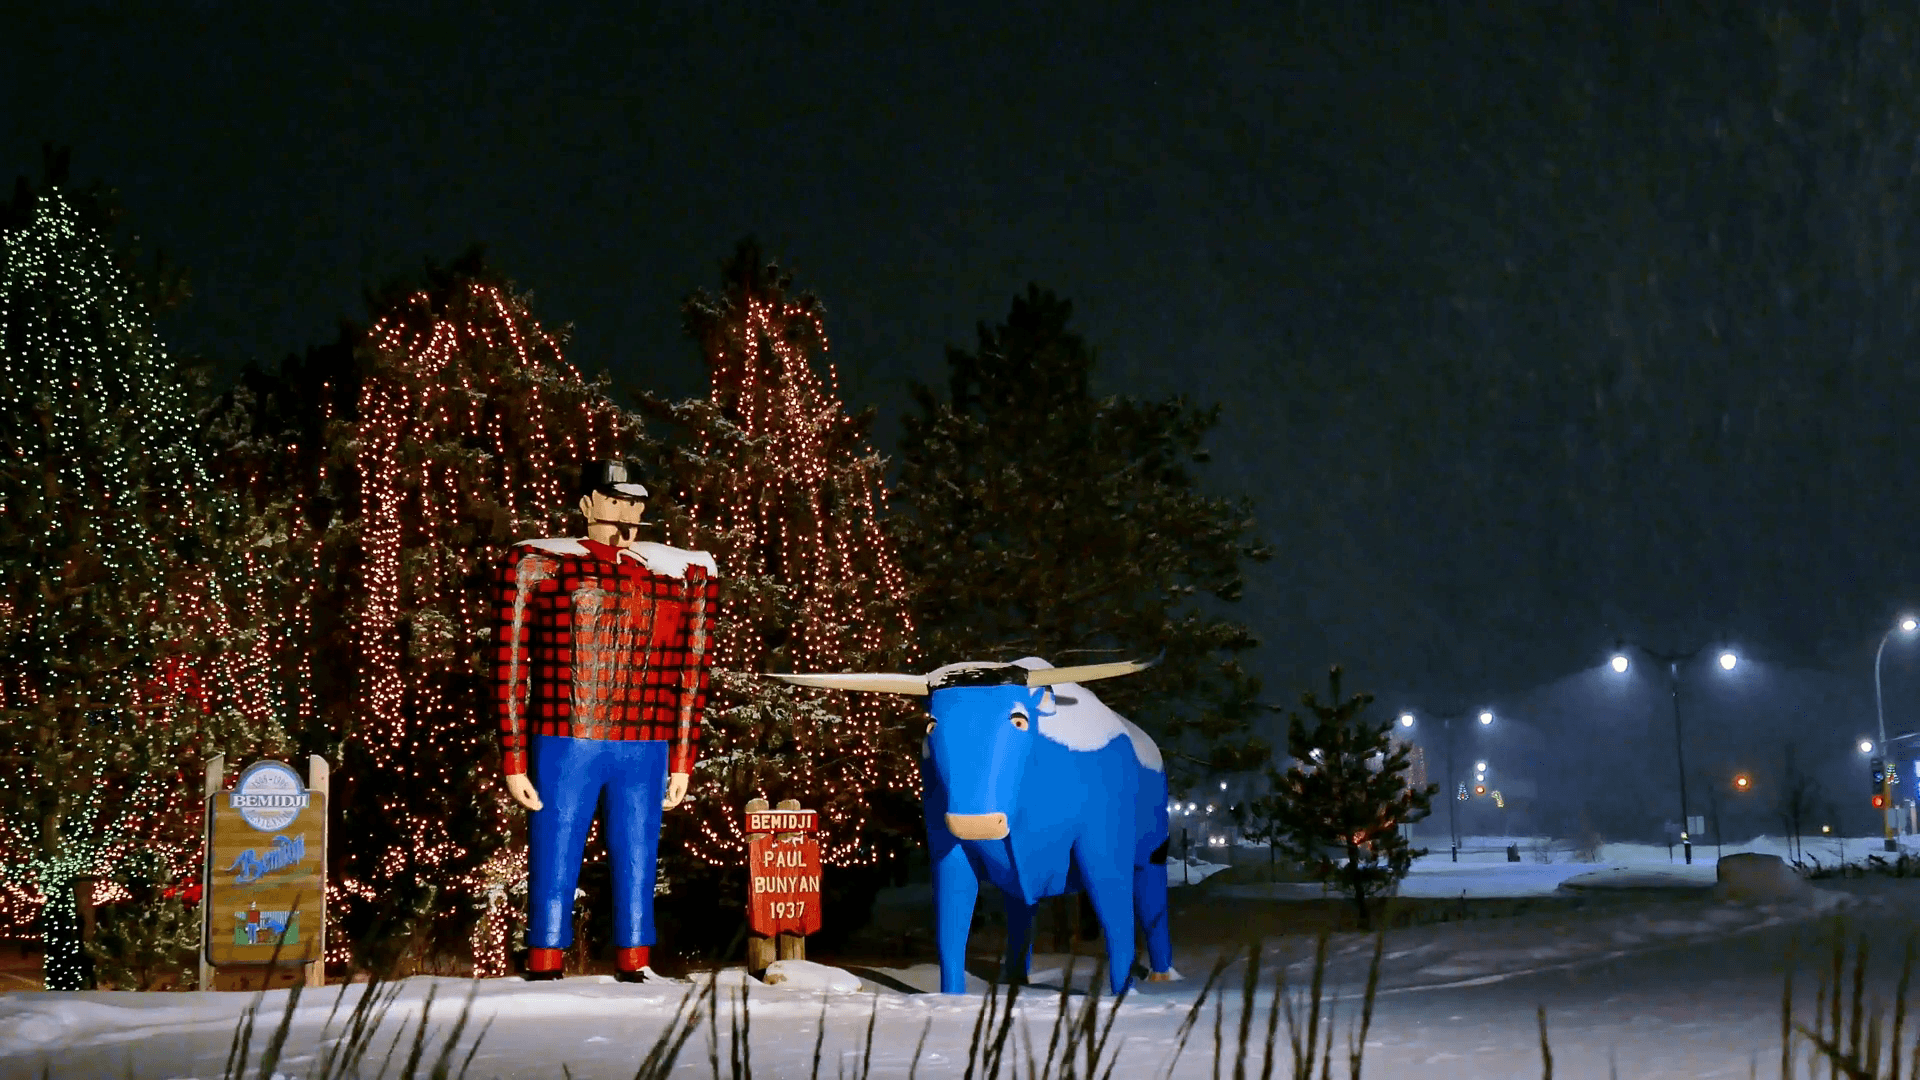 Paul Bunyan and Babe the Blue Ox in Winter Stock Video Footage